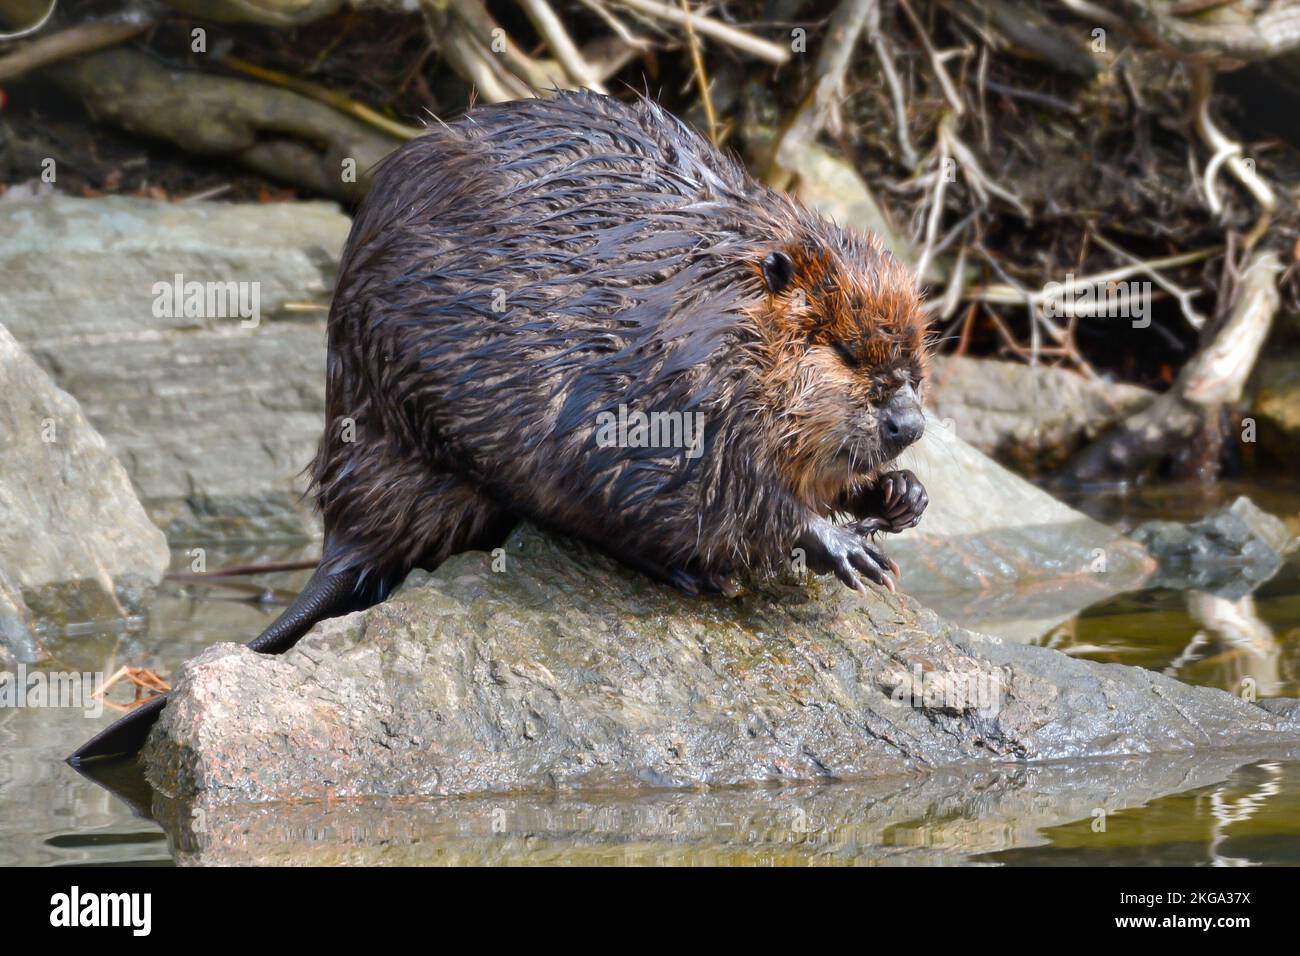 A sleepy Canadian Beaver resting on a big rock after coming out of hibernation in early Spring. Stock Photo